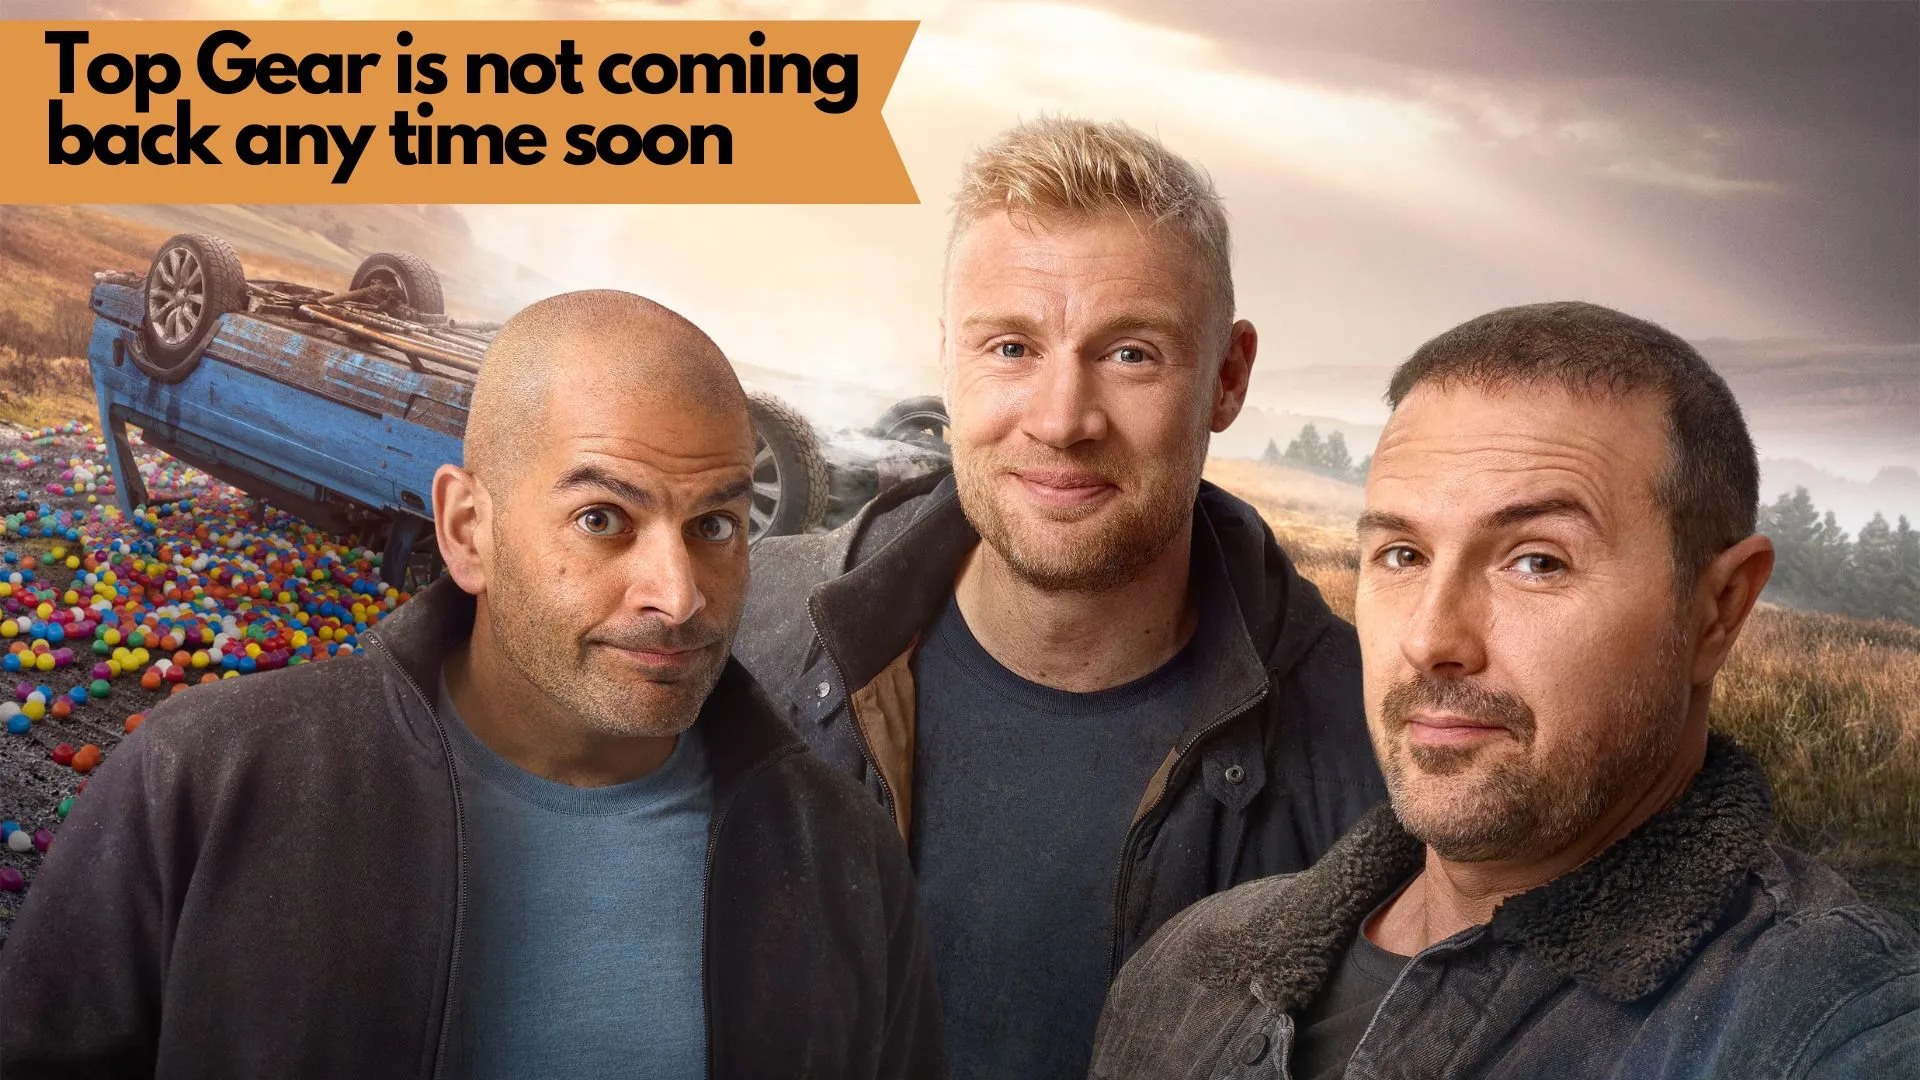 Top Gear is not coming back any time soon (Image credit: metro.co.uk)